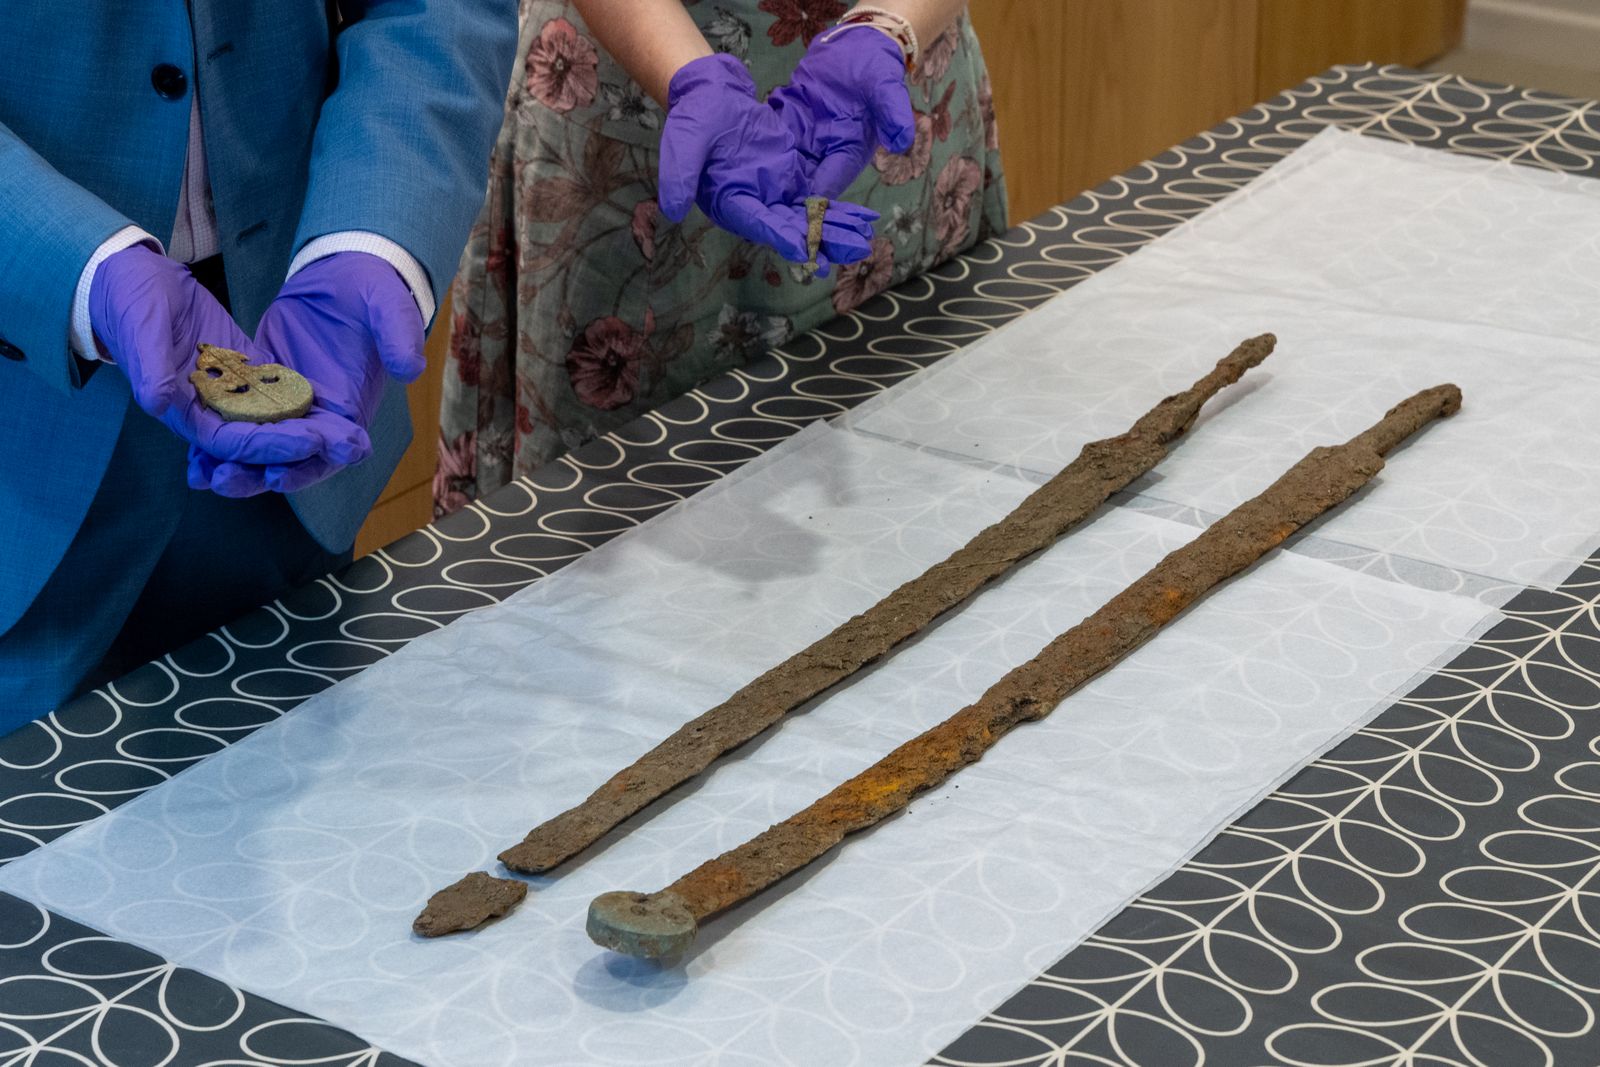 Two 1,800-Year-Old Roman Cavalry Swords Unearthed in England